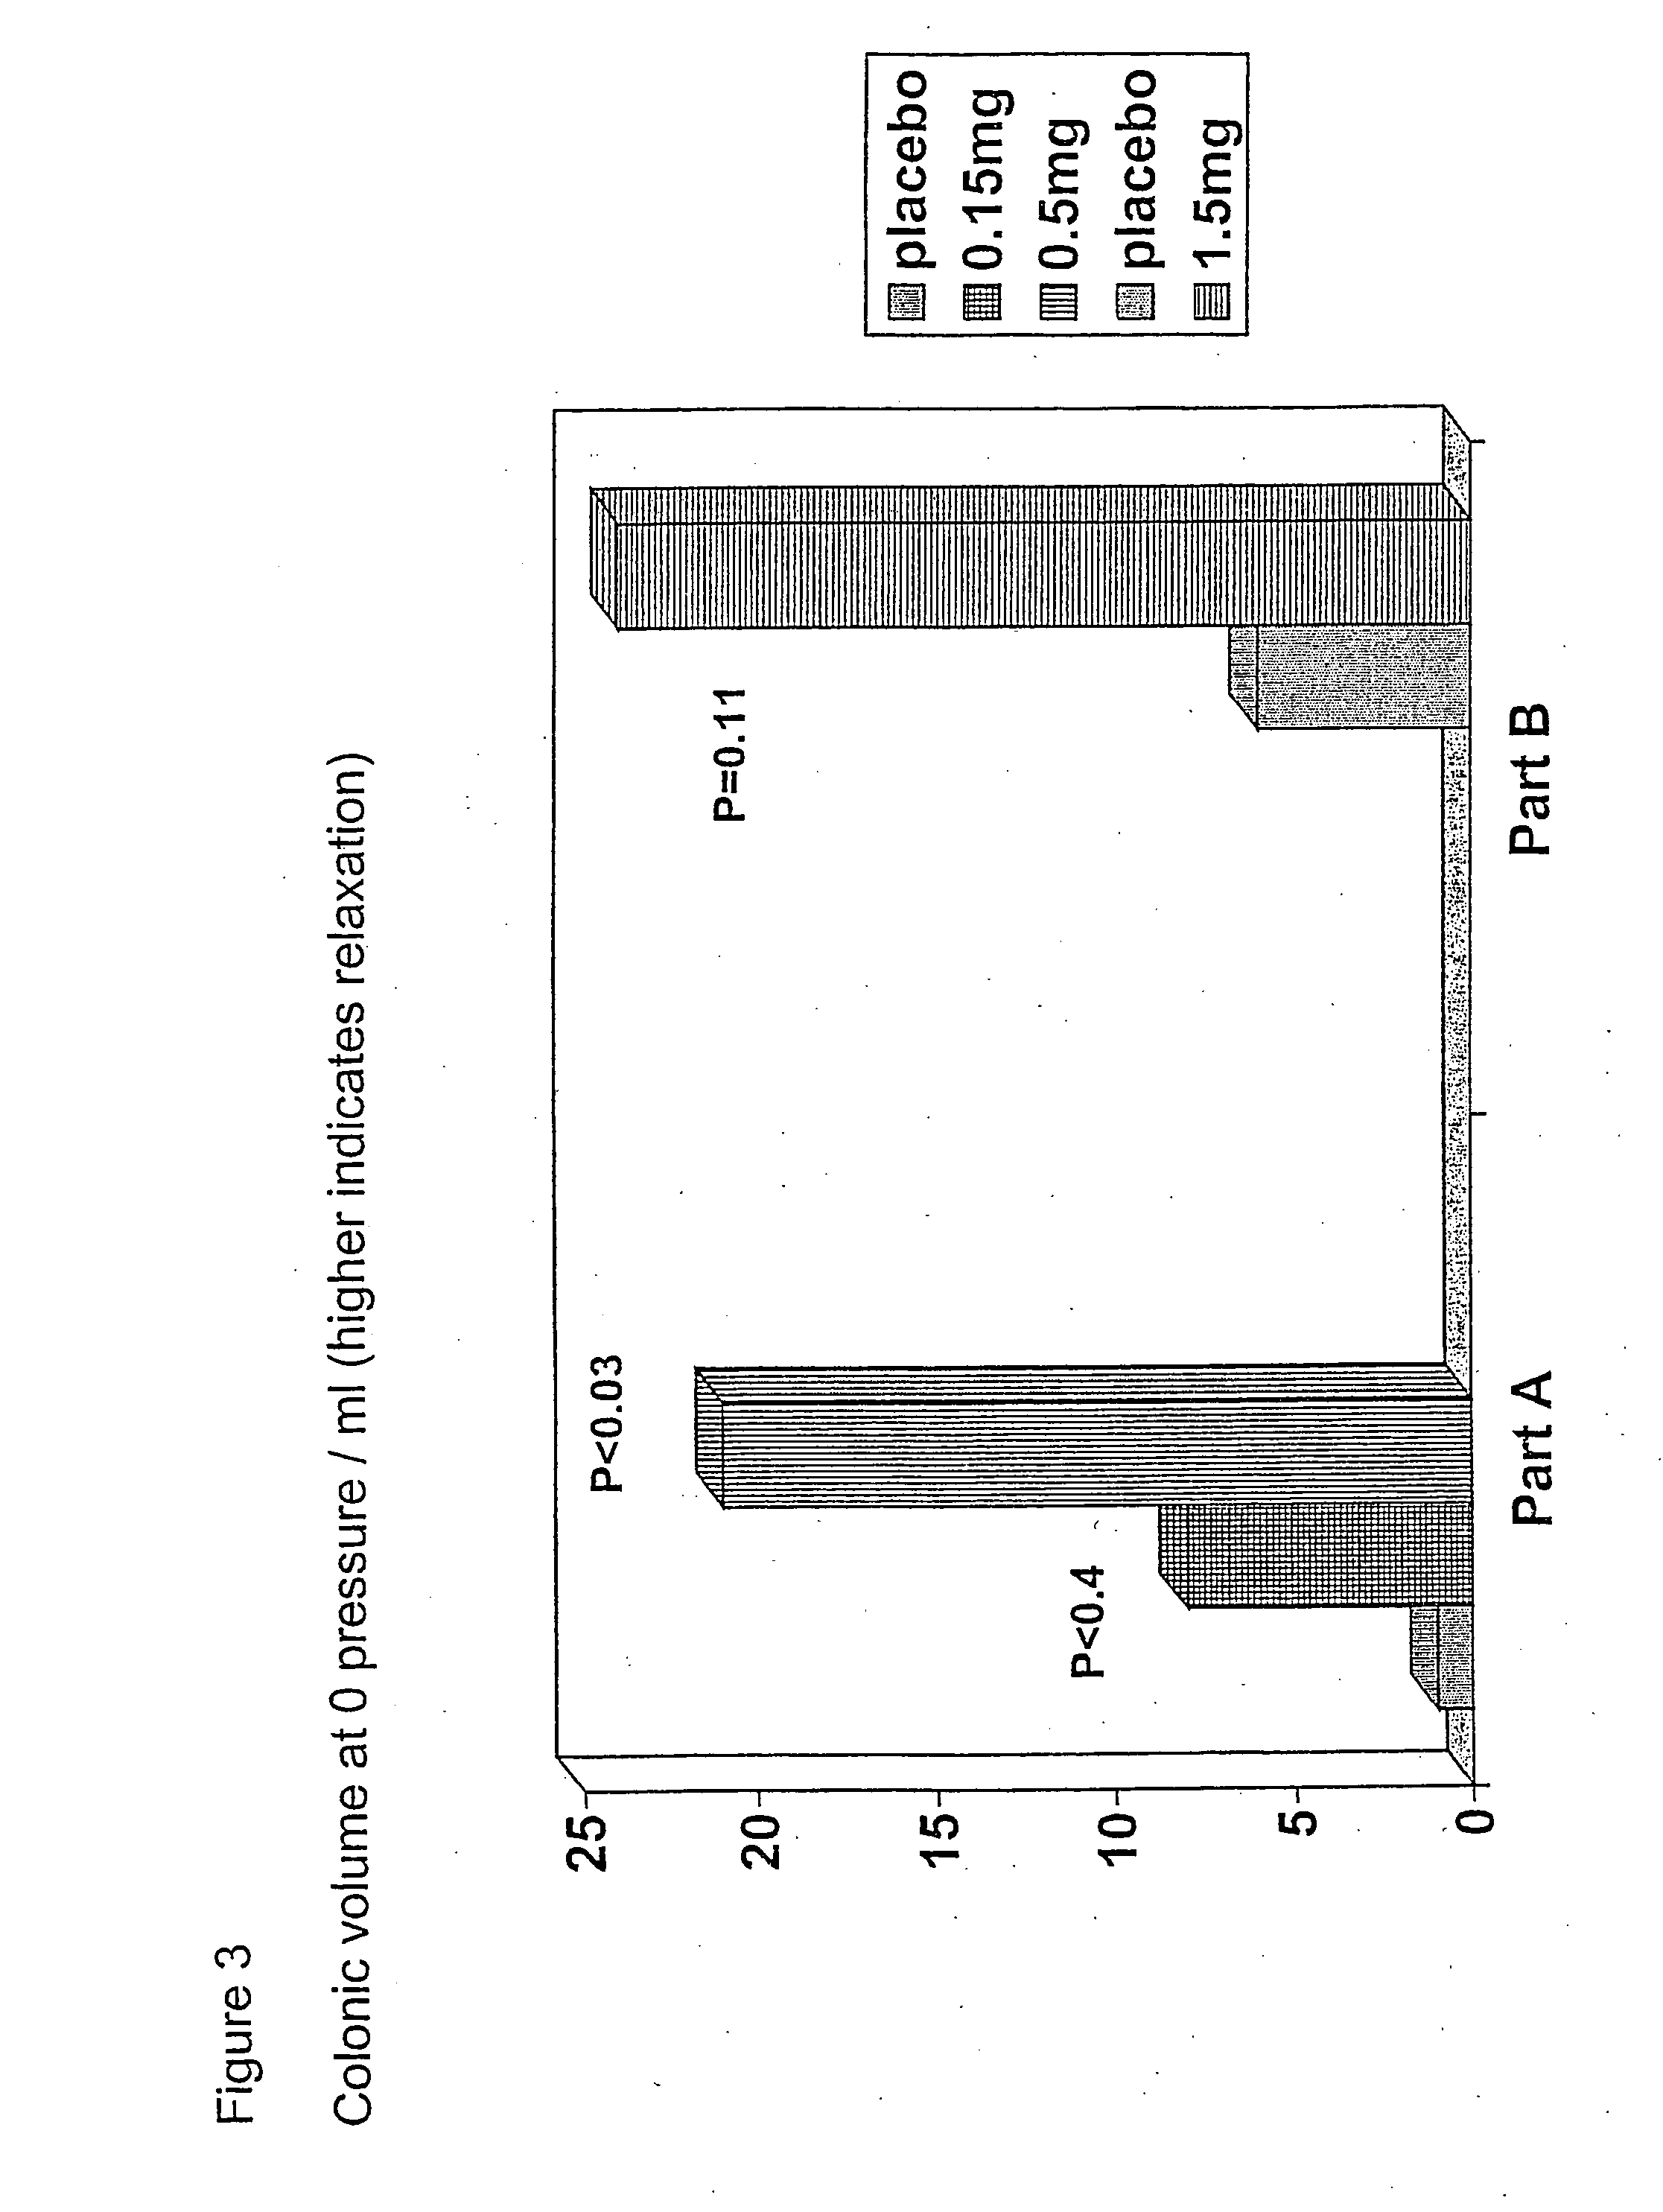 Use of compounds that are effective as selective opiate receptor modulators